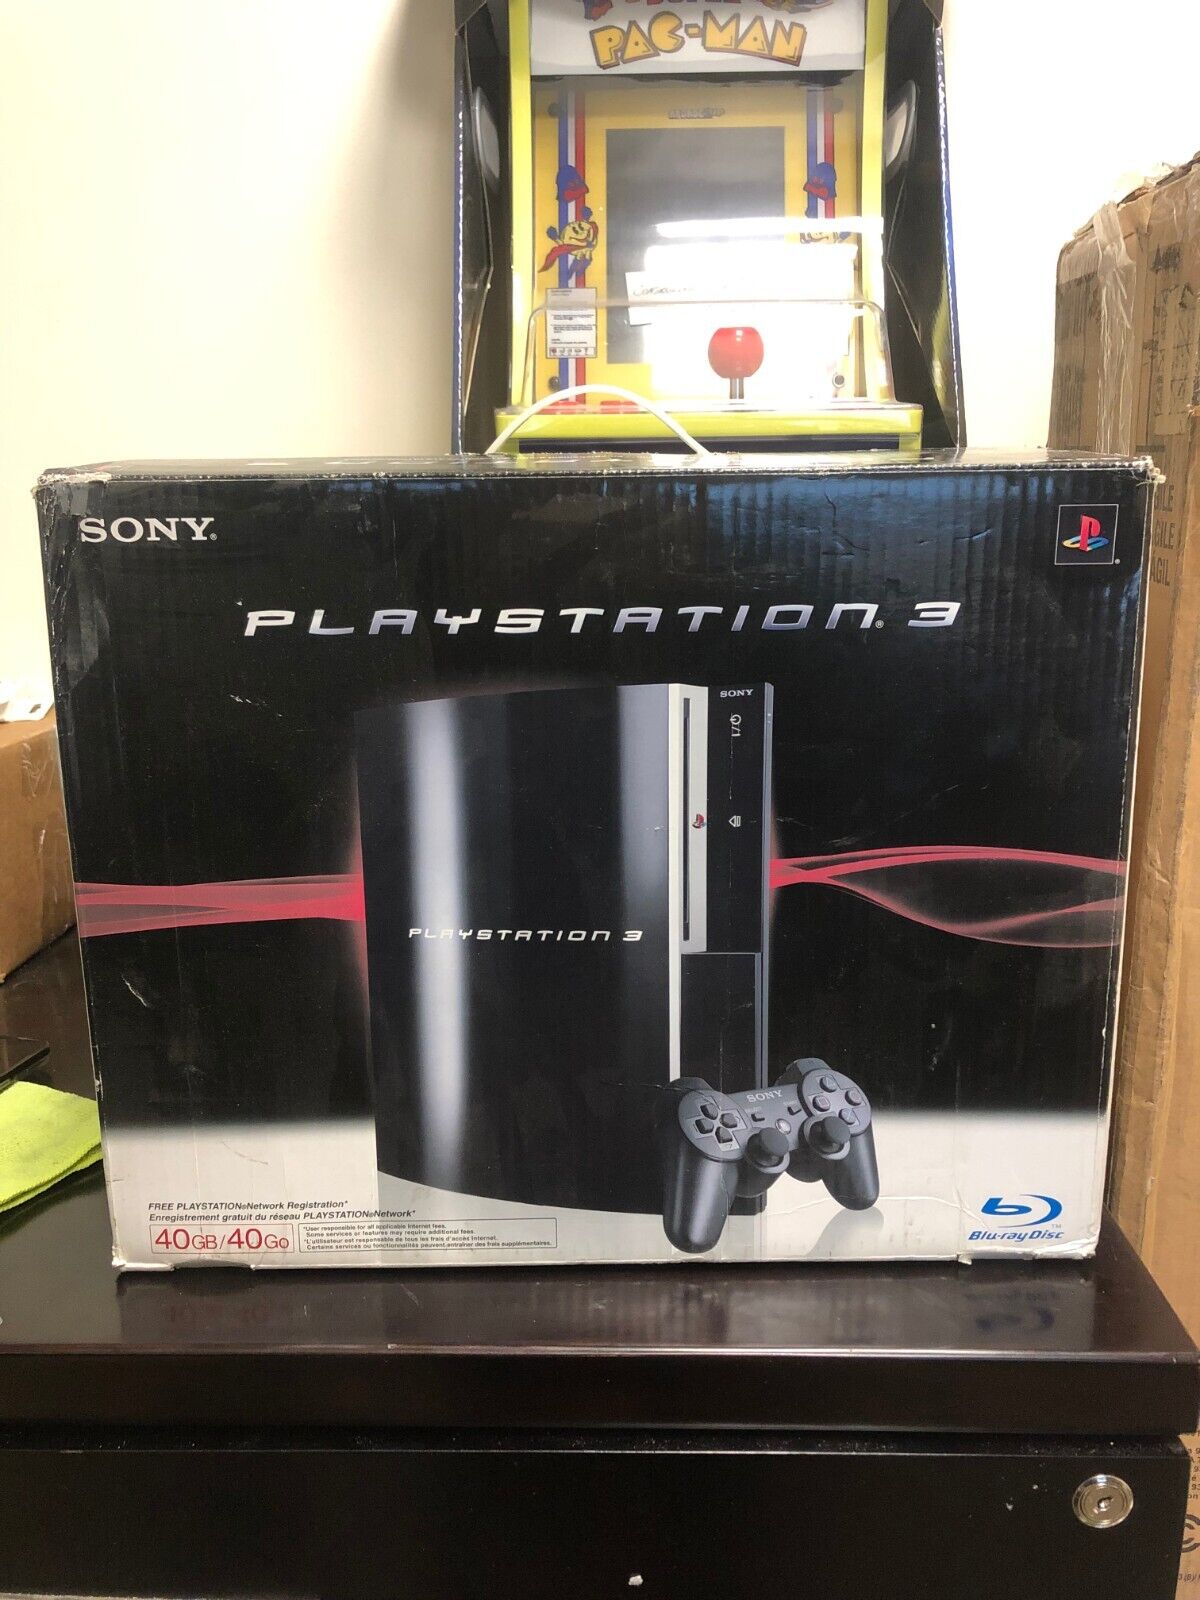 Slang seks Oneindigheid Sony PlayStation 3 Launch Edition 40GB Home Console - Black for sale online  | eBay